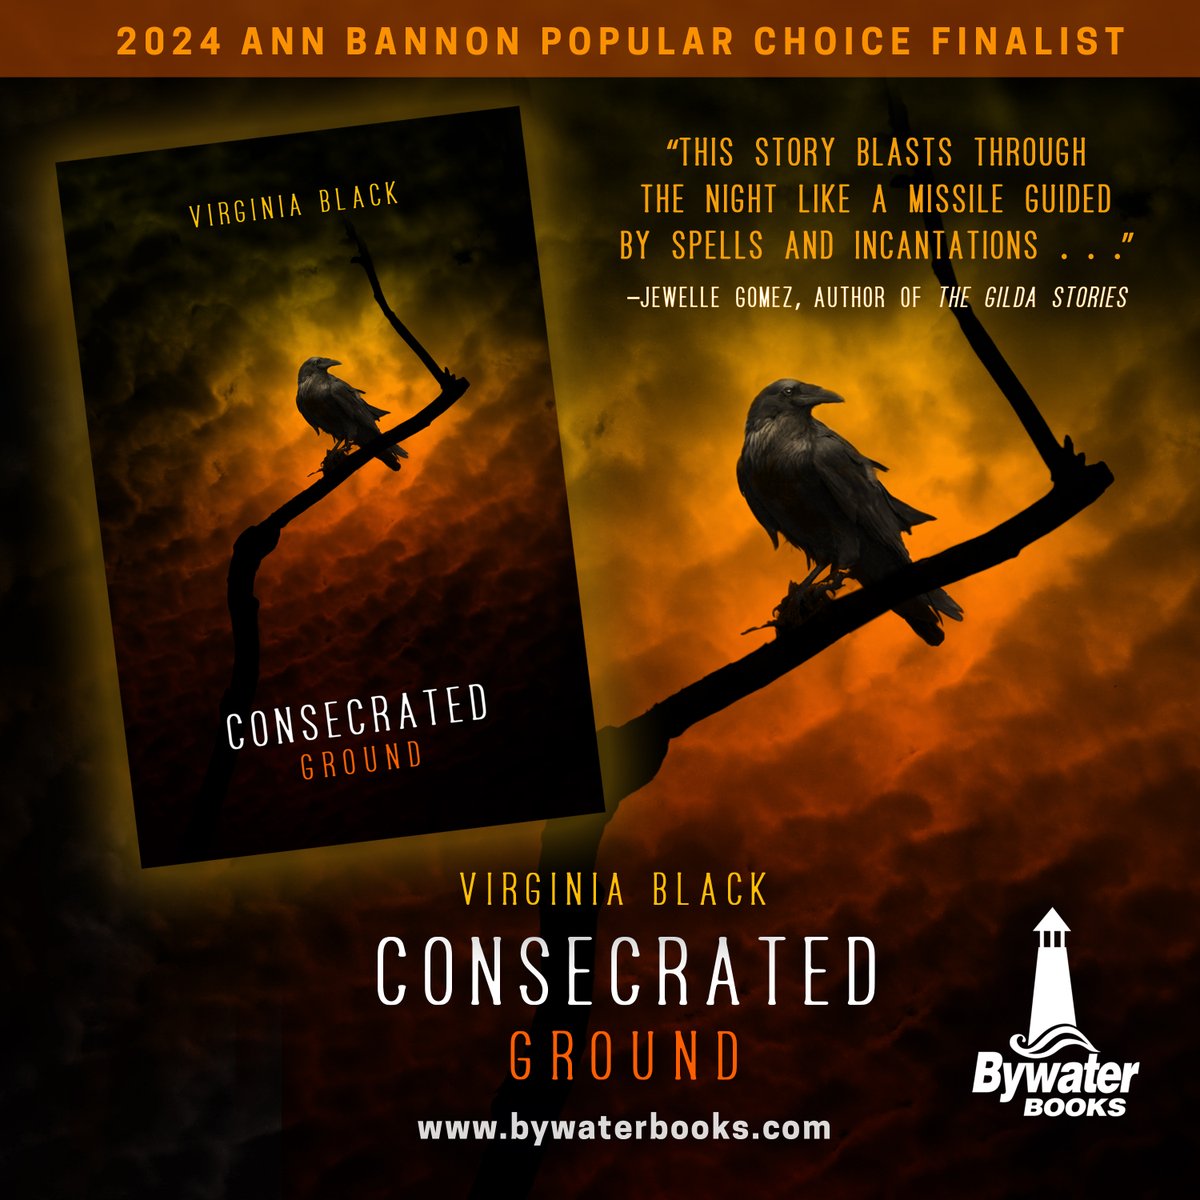 *WOW*! My debut novel, CONSECRATED GROUND (from @BywaterBooks !) is a GCLS 2024 Ann Bannon Popular Choice Finalist! Honored to be listed alongside such talented authors. If you want to vote, you MUST subscribe to the GCLS newsletter by 5pm PST April 22nd- bit.ly/GCLSNEWS